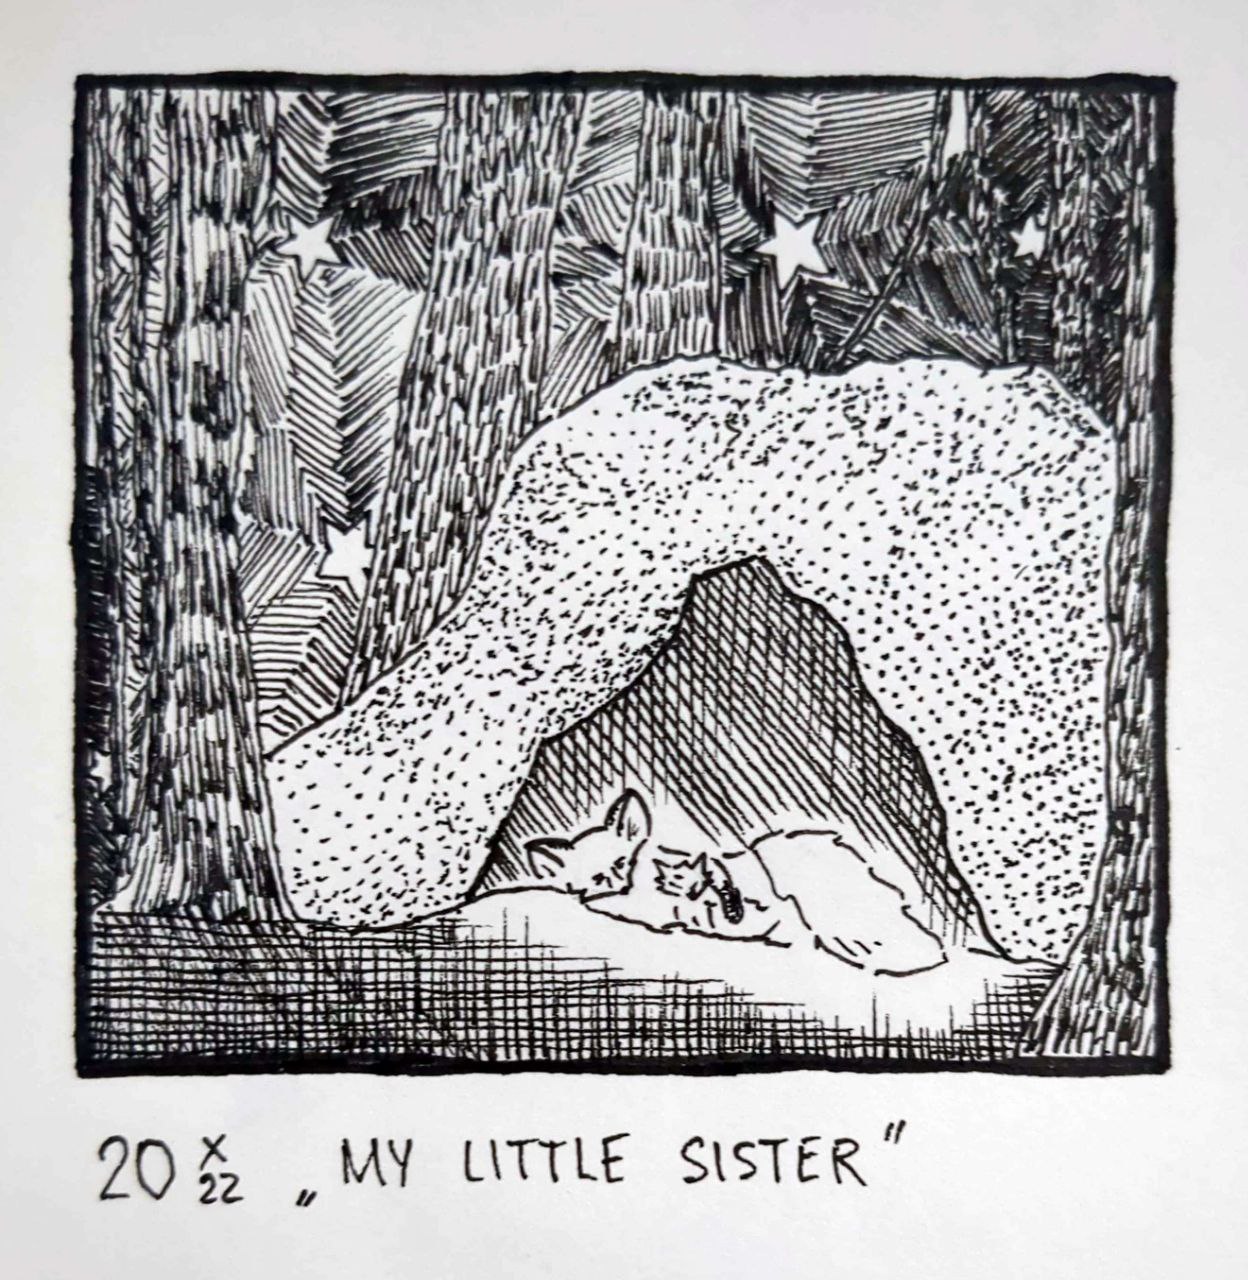 Drawing of two foxes resting in a den among trees, the larger one hugging the other under the stars. Labeled 20/X/22 "My little sister"